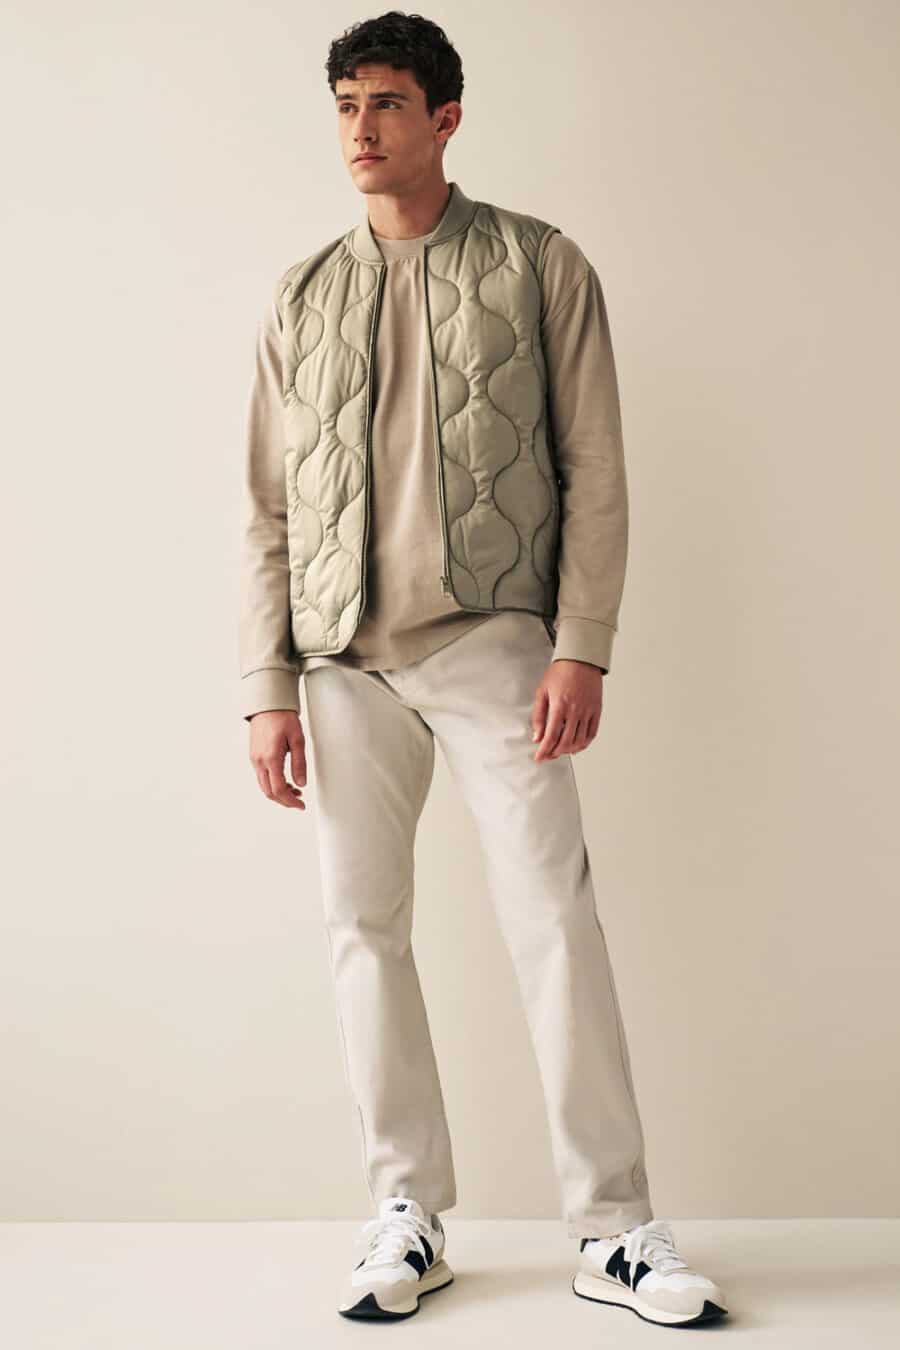 Men's off-white chinos, beige long-sleeve top, light green padded vest and white New Balance sneakers outfit